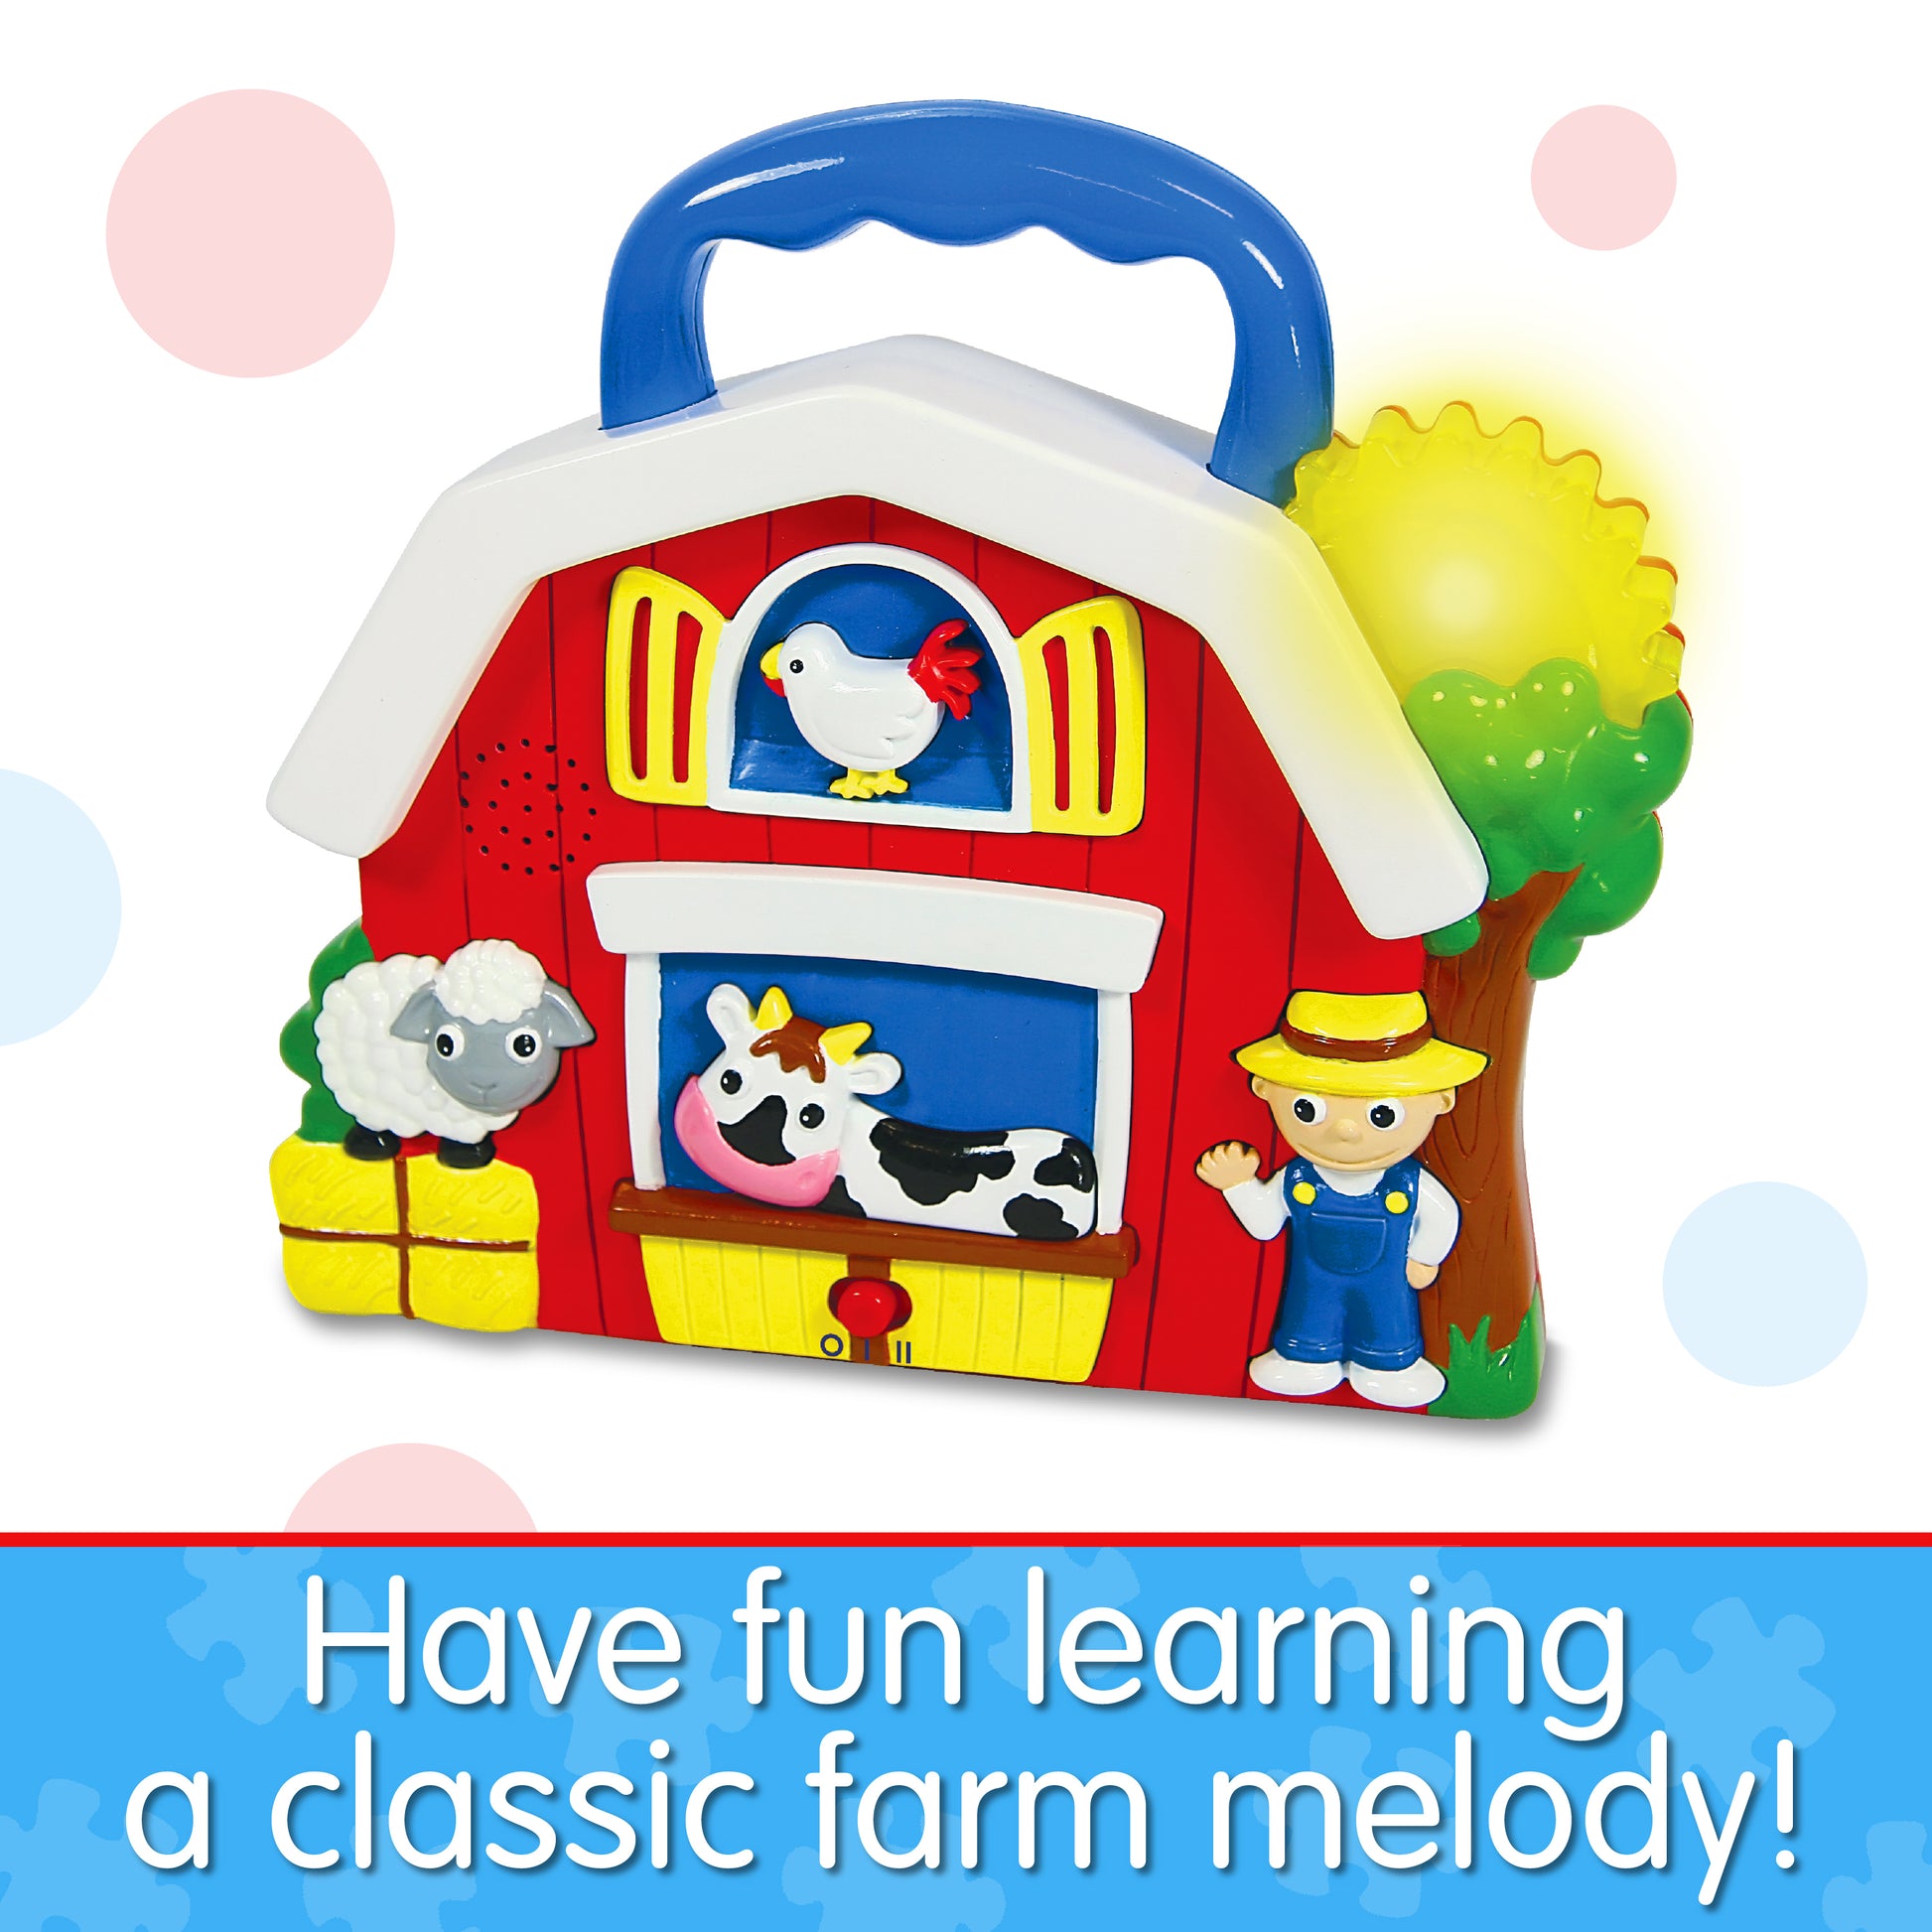 Infographic of Old MacDonald's Farm that reads "Have fun learning a classic farm melody!"